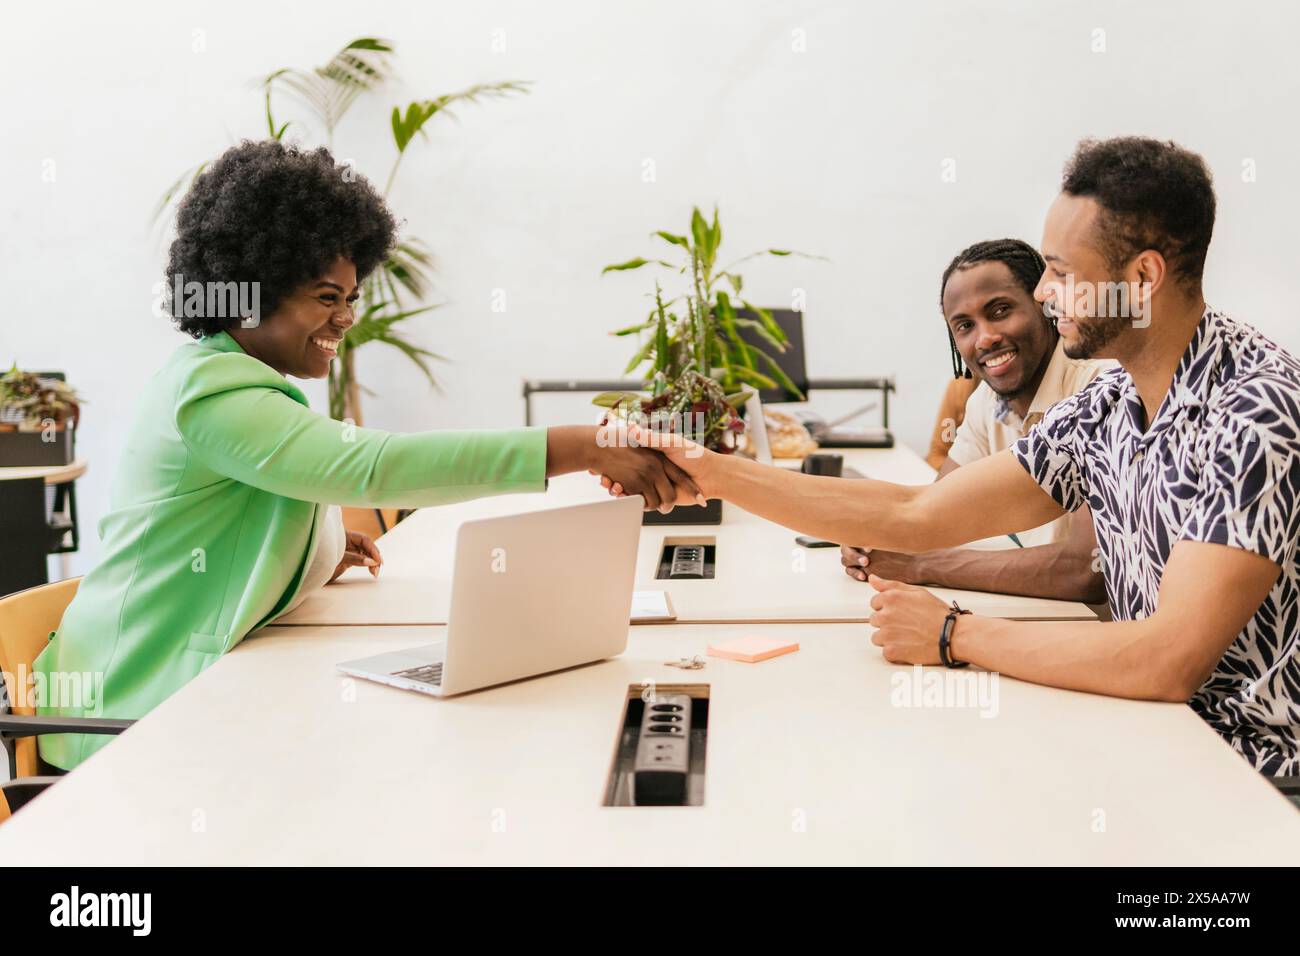 Three professionals happily engaging in a fist bump over a work table in a bright coworking environment Stock Photo